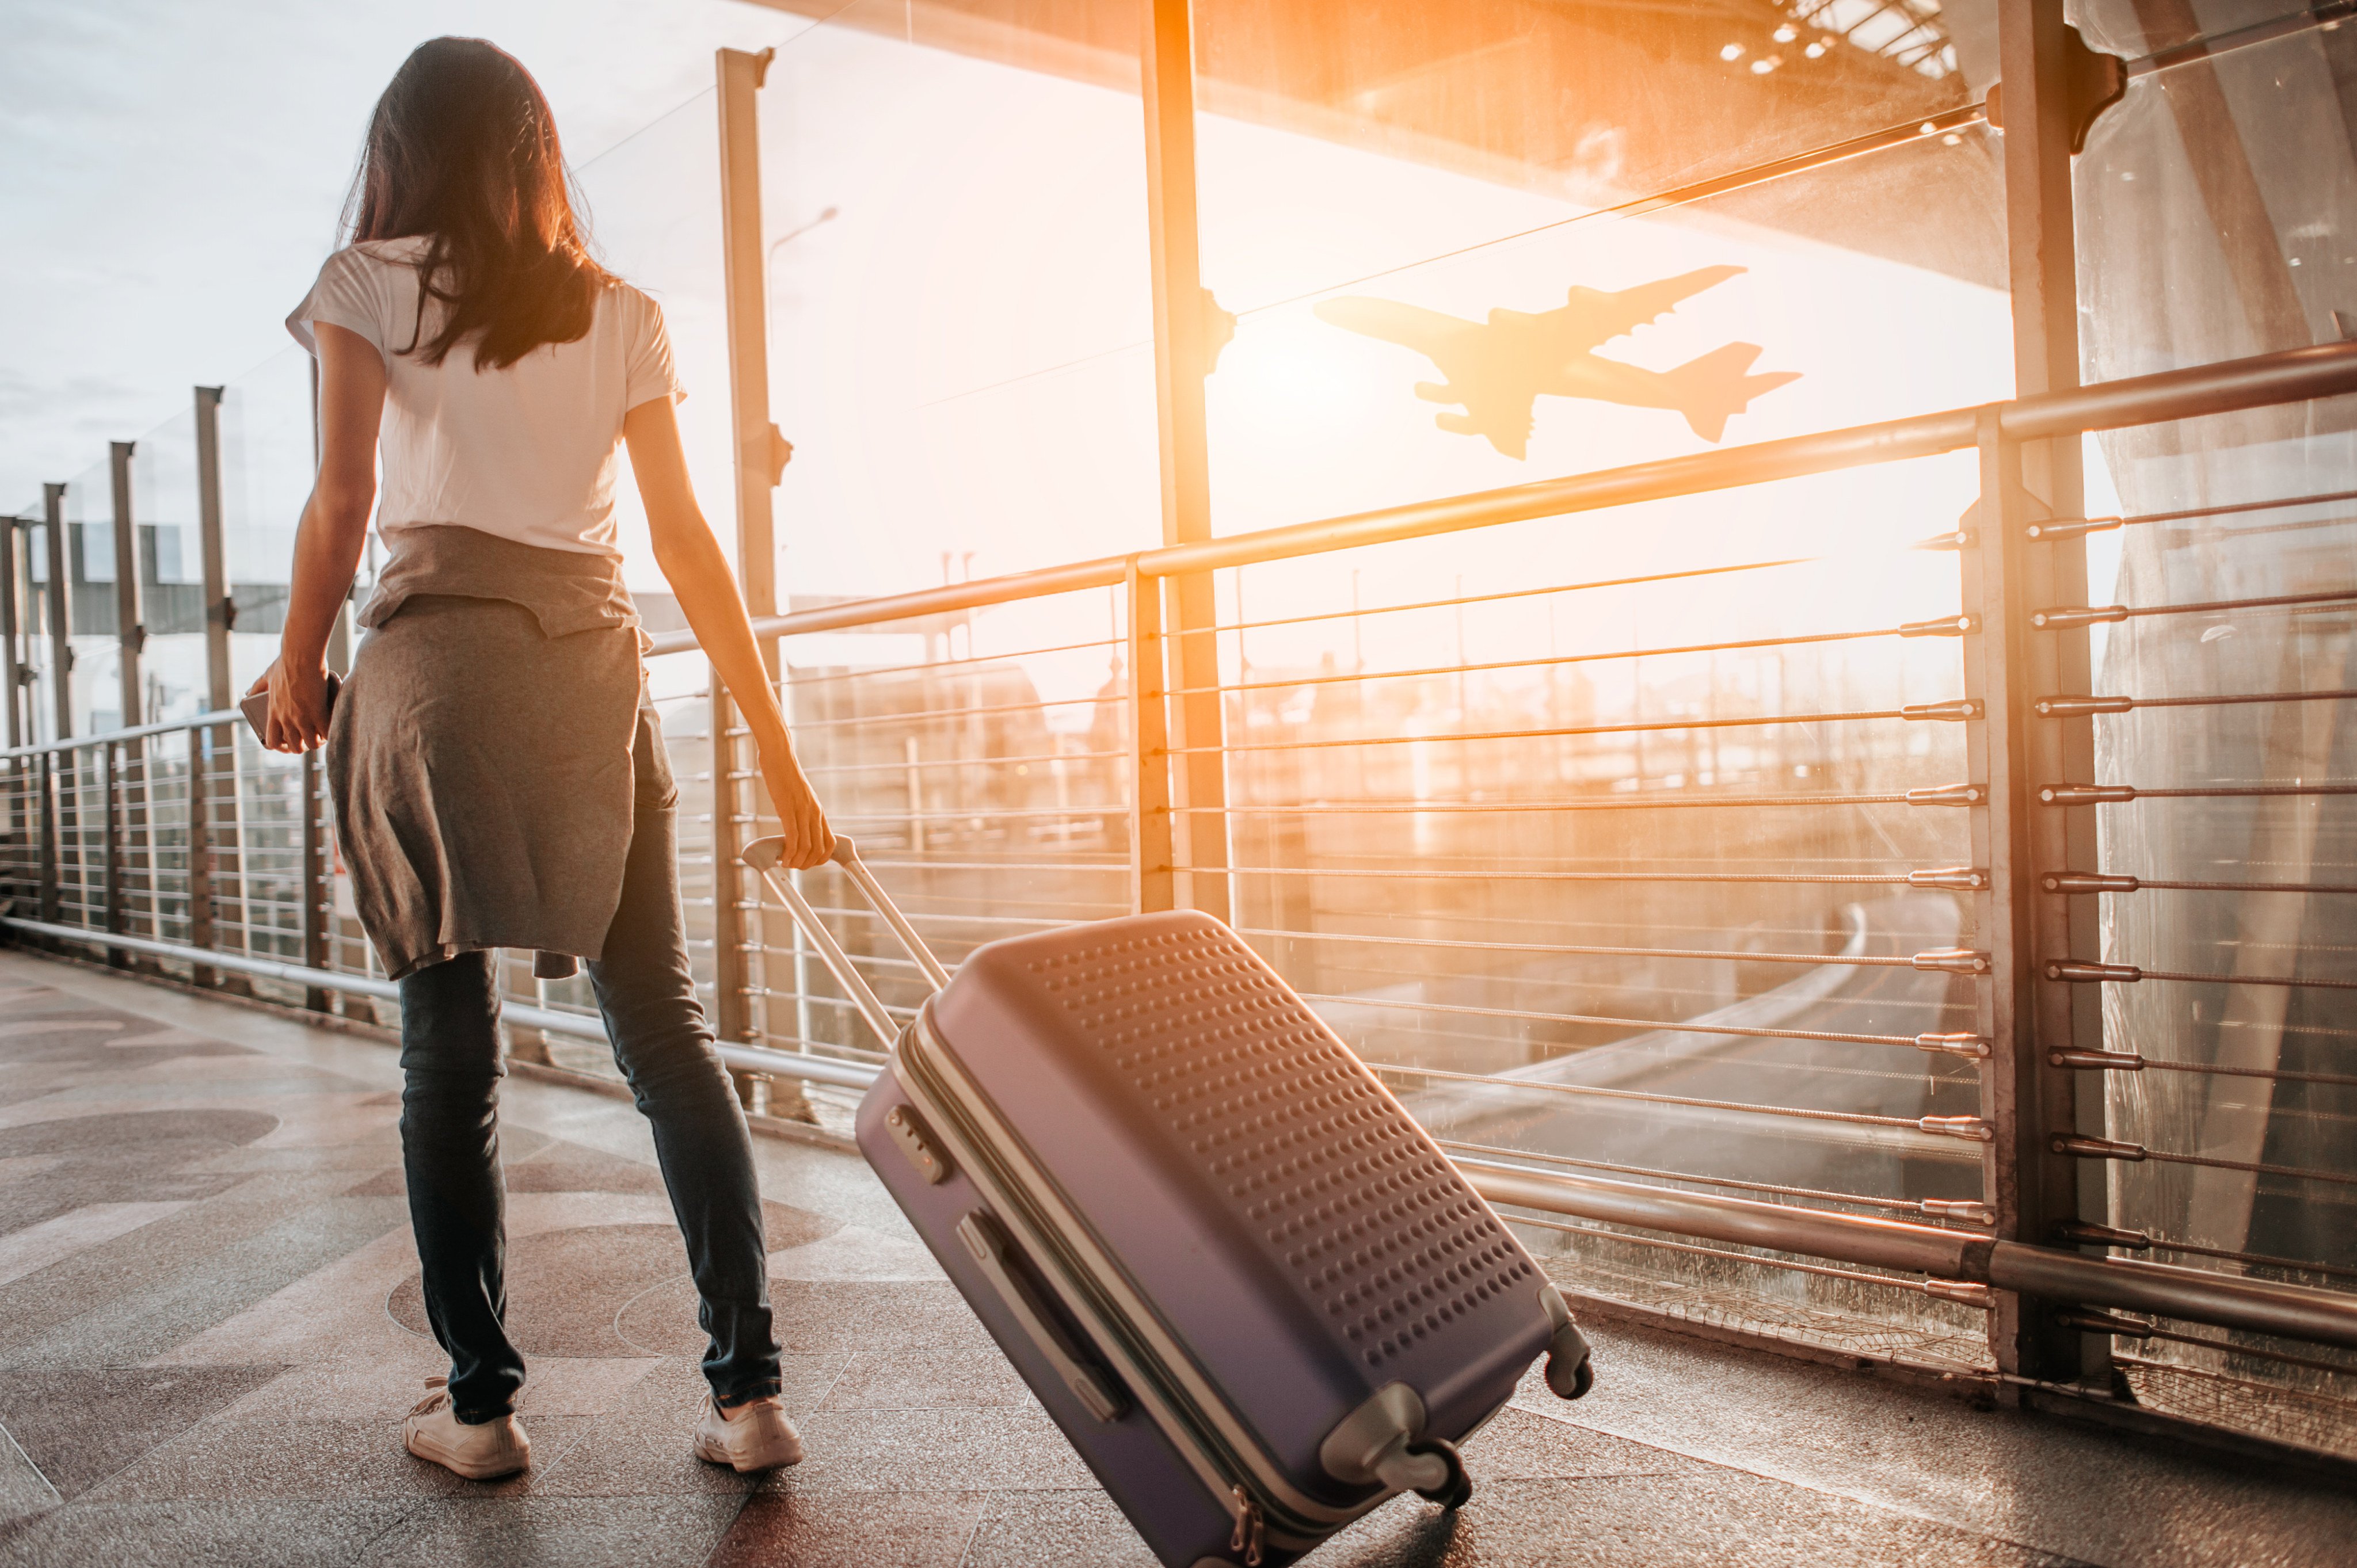 Host a Sister Facebook group was inspired by solo women’s travel horror stories. Its more than 550,000 female members offer accommodation, advice and help bring travellers together. Photo: Getty Images